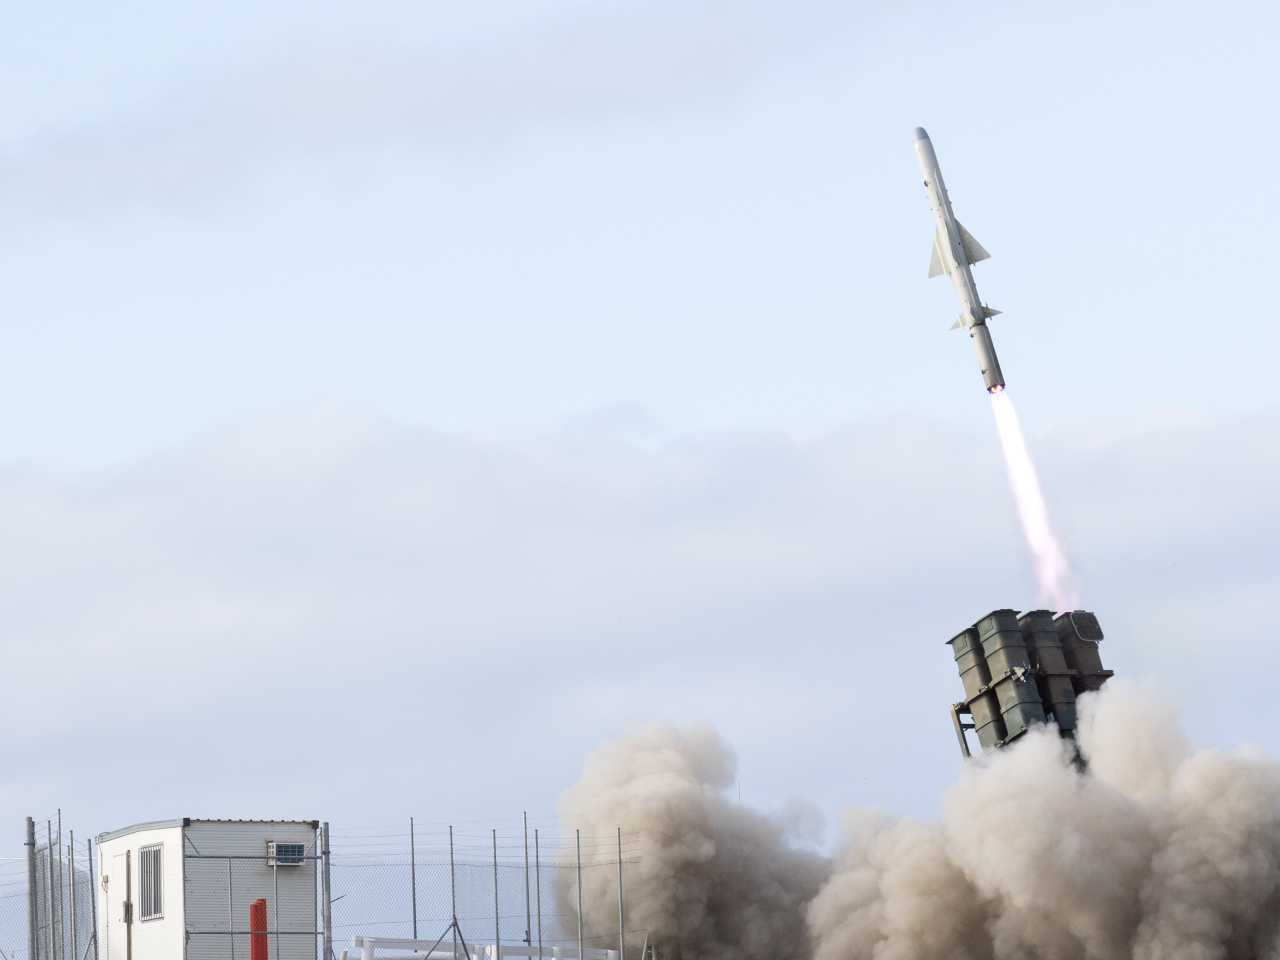 Soldiers of the Japan Ground Self-Defense Force launch a Type 12 Surface-to-Ship Missile at Beecroft Weapons Range, New South Wales during Exercise Talisman Sabre 2023. *** Local Caption *** Exercise Talisman Sabre 2023 is being conducted across northern Australia from 22 July to 4 August. More than 30,000 military personnel from 13 nations will directly participate in Talisman Sabre 2023, primarily in Queensland but also in Western Australia, the Northern Territory and New South Wales. Talisman Sabre is the largest Australia-US bilaterally planned, multilaterally conducted exercise and a key opportunity to work with likeminded partners from across the region and around the world. Fiji, France, Indonesia, Japan, Republic of Korea, New Zealand, Papua New Guinea, Tonga, the United Kingdom, Canada and Germany are all participating in Talisman Sabre 2023 with the Philippines, Singapore and Thailand attending as observers. Occurring every two years, Talisman Sabre reflects the closeness of our alliance and strength of our enduring military relationship with the United States and also our commitment to working with likeminded partners in the region. Now in its tenth iteration, Talisman Sabre provides an opportunity to exercise our combined capabilities to conduct high-end, multi-domain warfare, to build and affirm our military-to-military ties and interoperability, and strengthen our strategic partnerships.